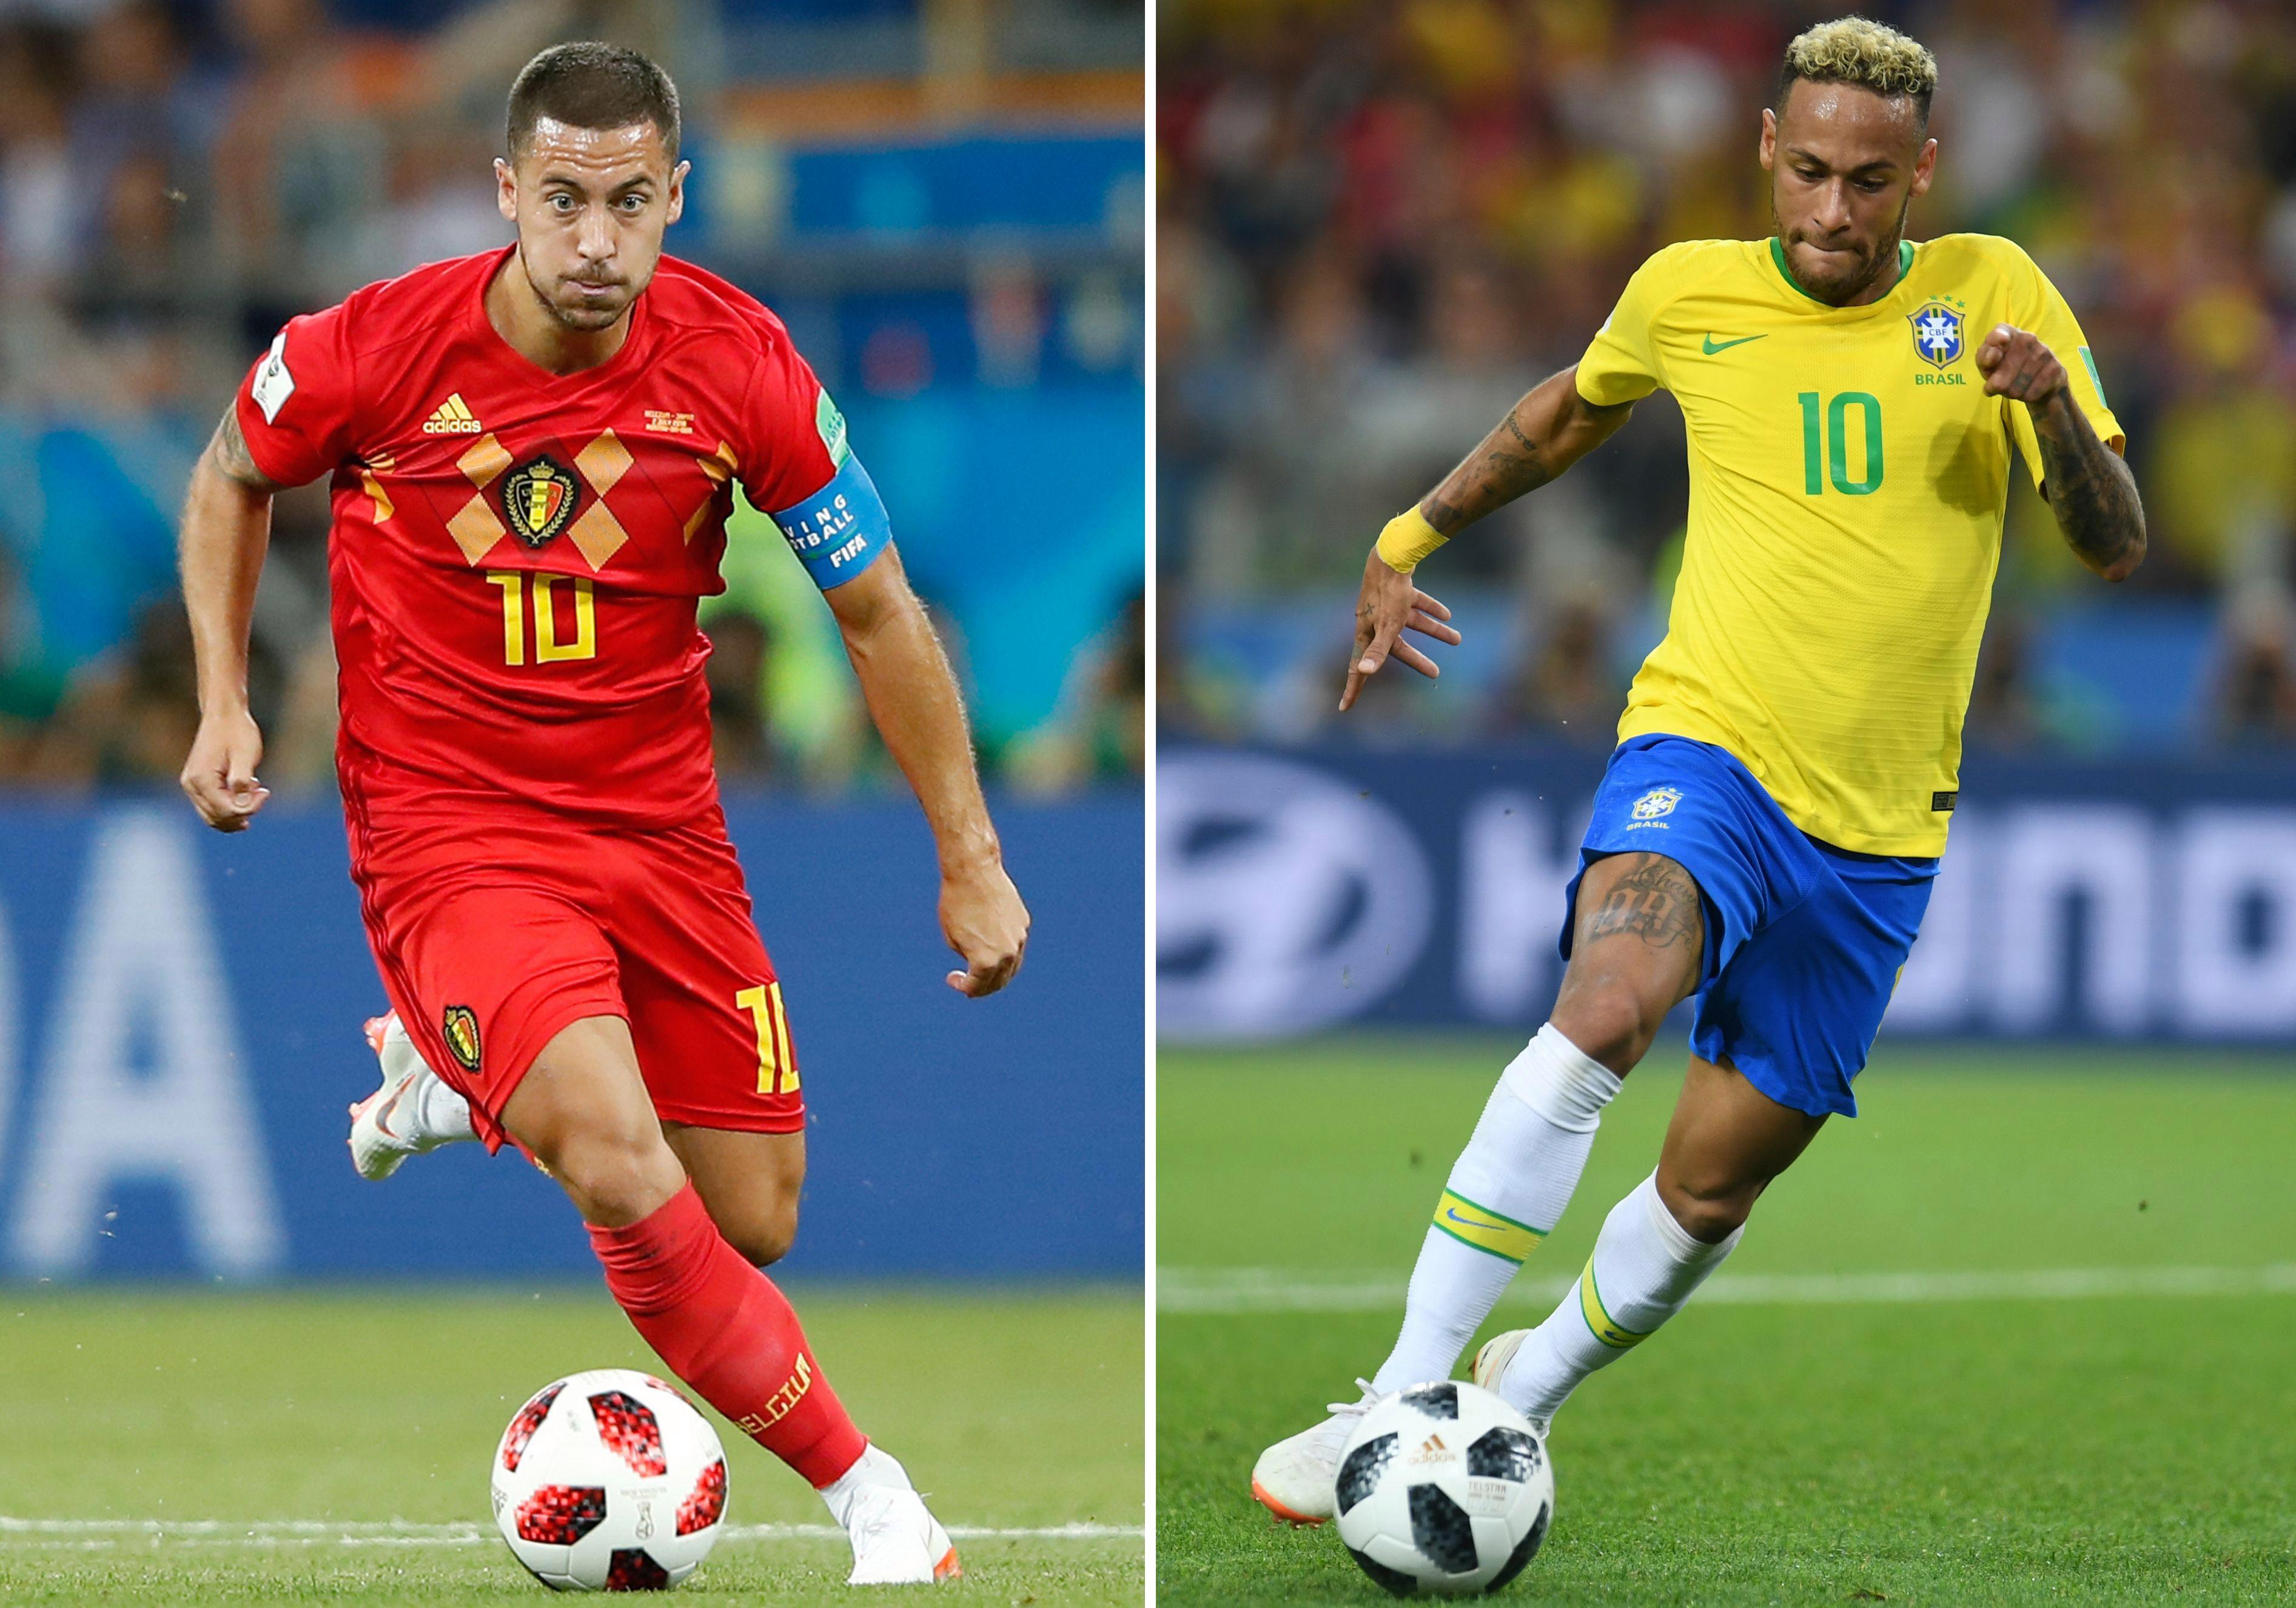 Real Madrid fans would prefer Chelsea star Eden Hazard to Neymar as Cristiano Ronaldo's replacement